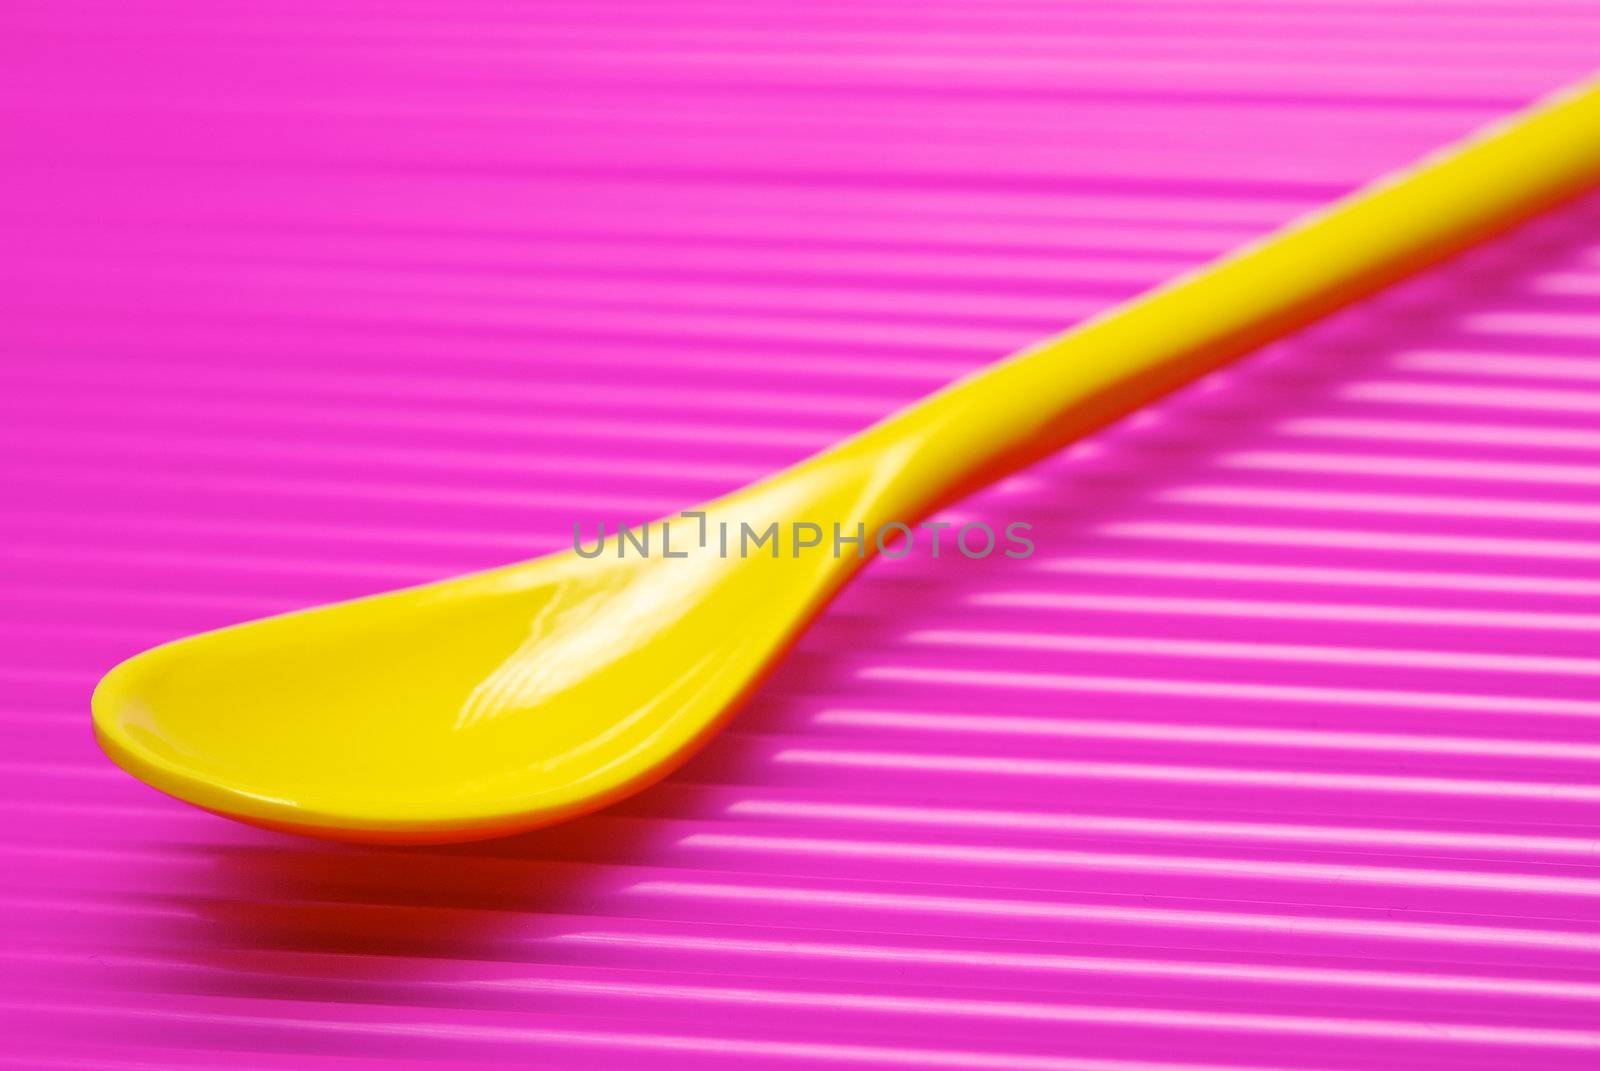 Single empty yellow desert spoon on abstract pink background.